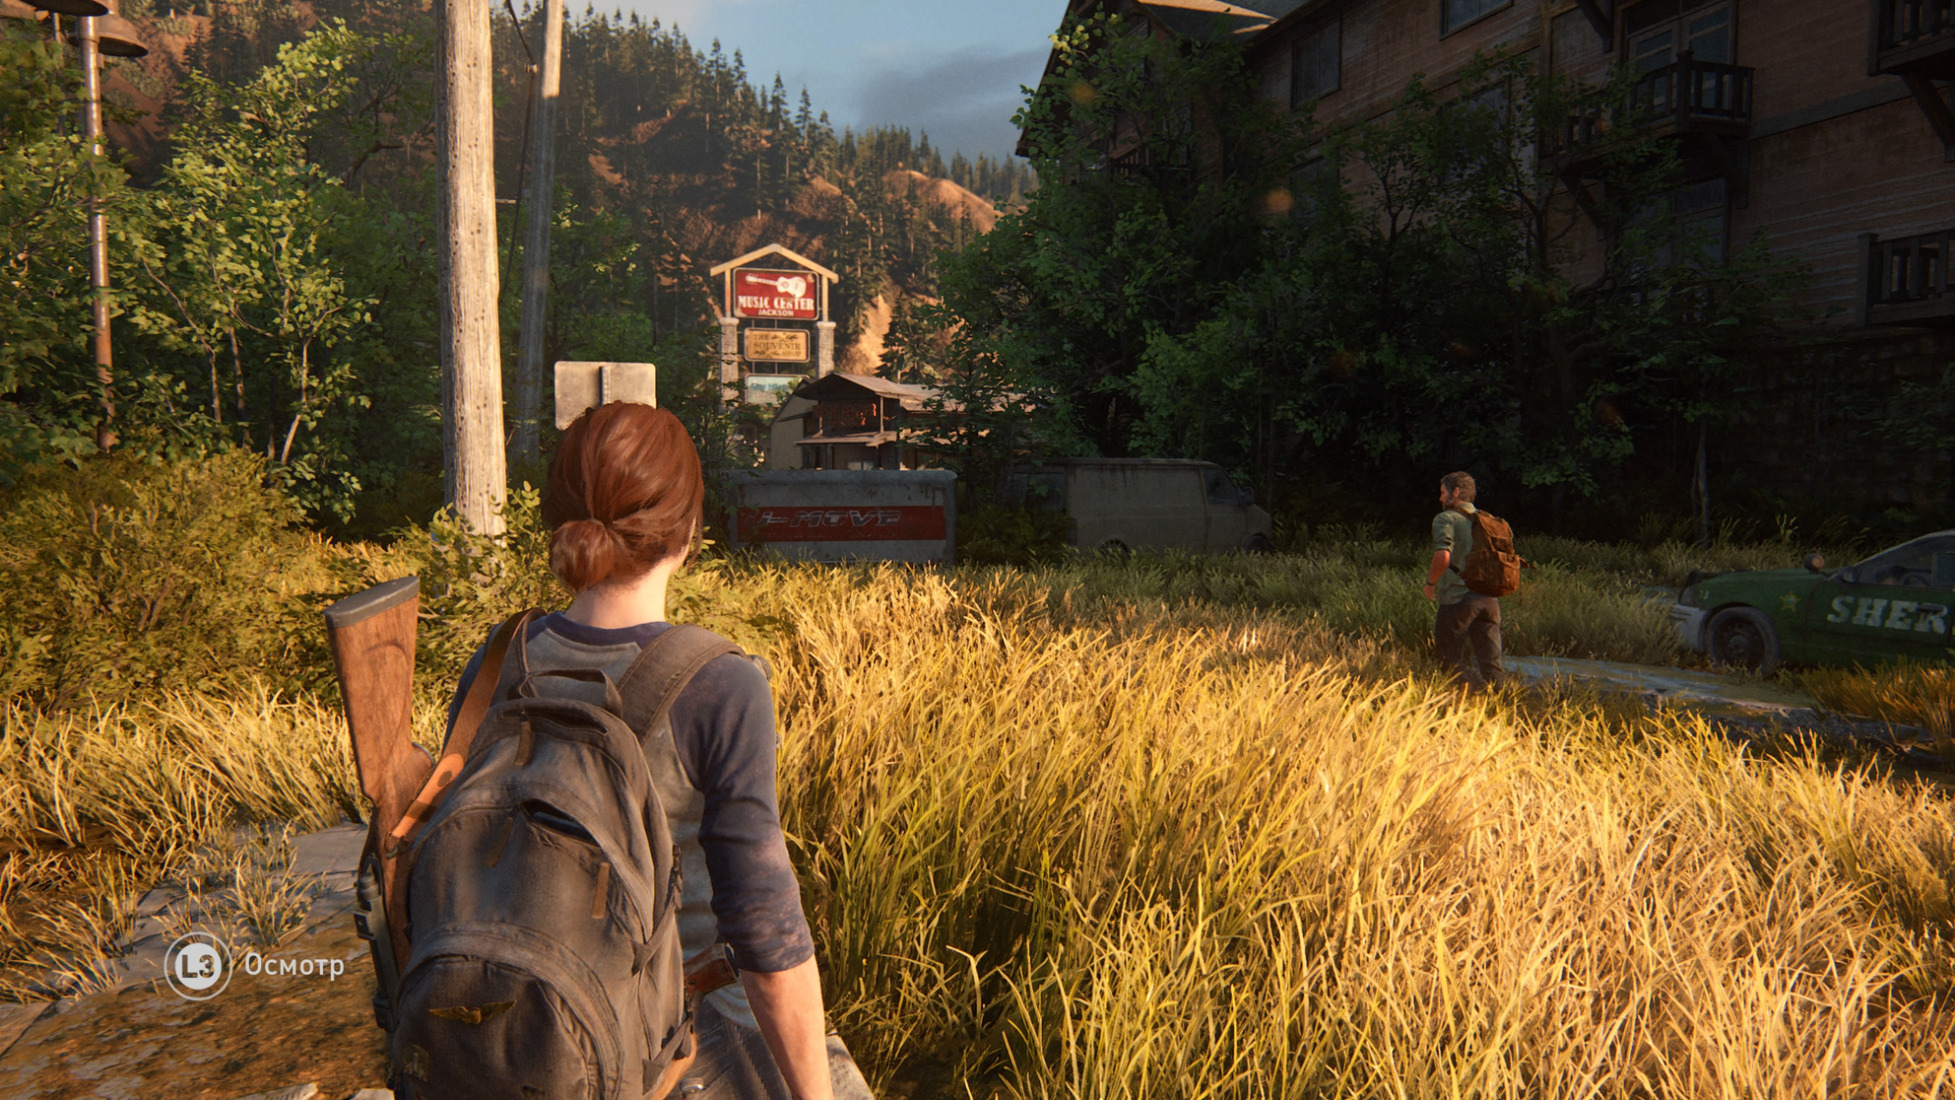 Taking игра ps4. PLAYSTATION 4 the last of us. The last of us игра на ps4.